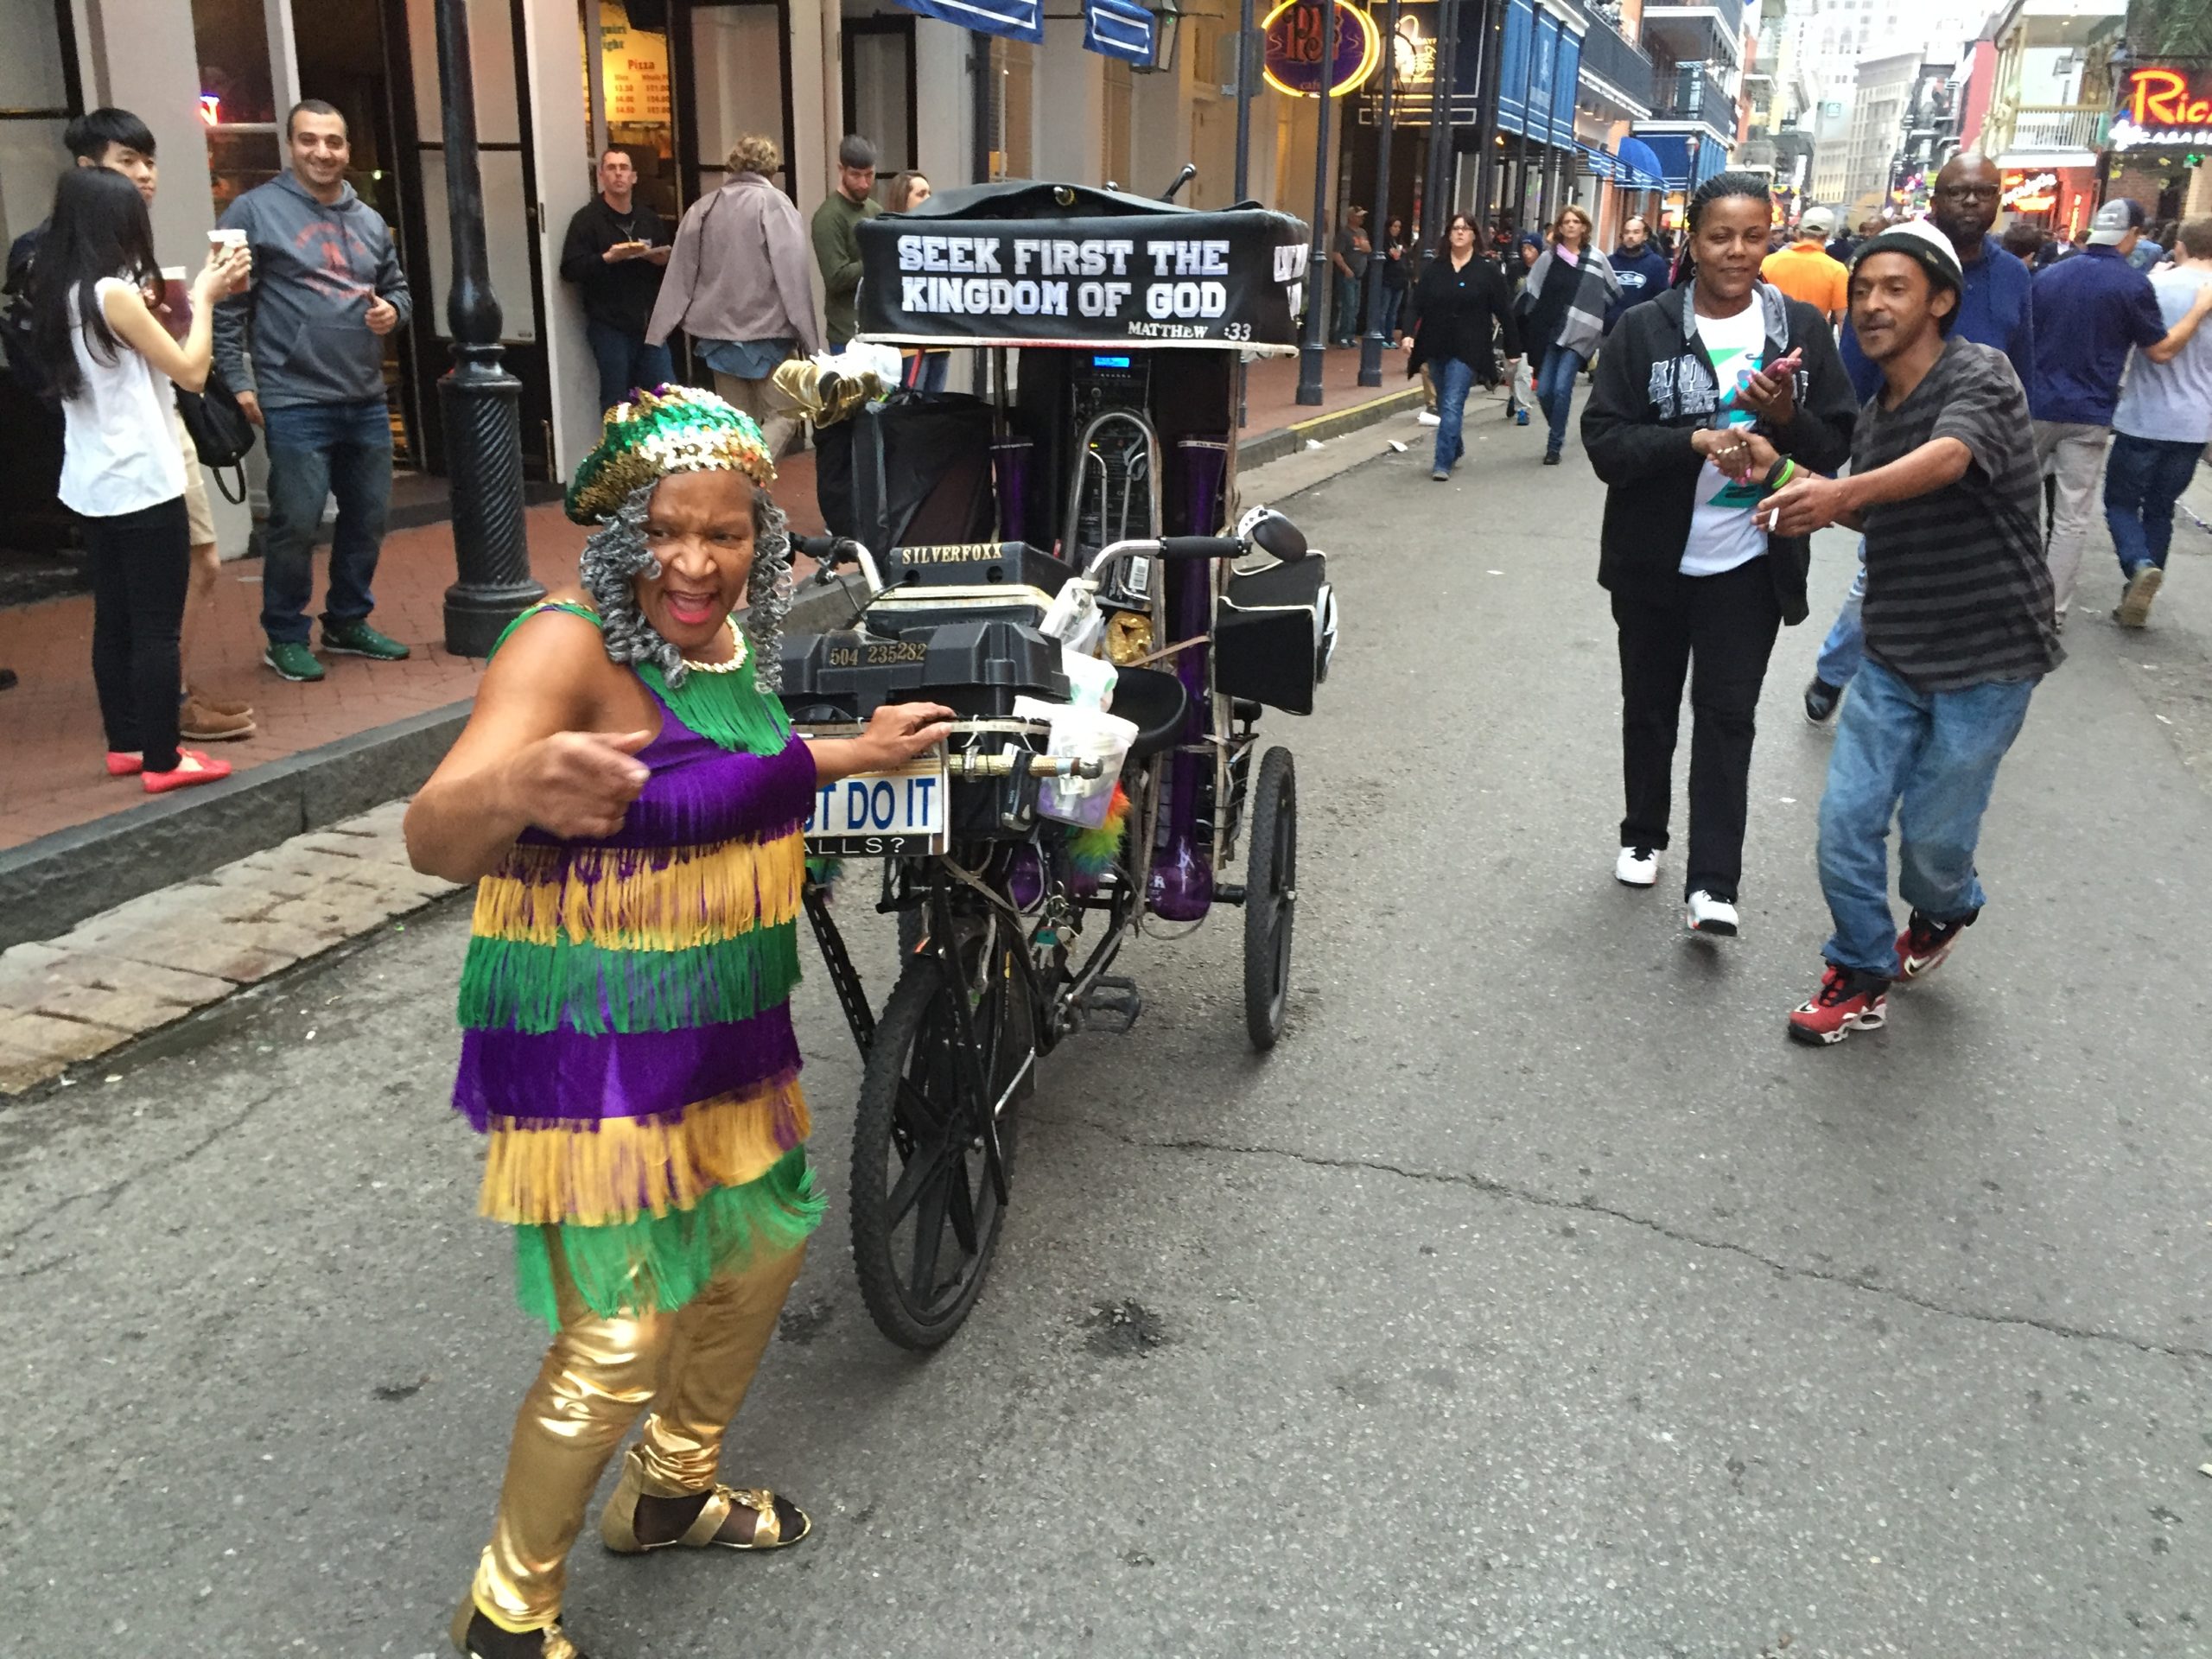 The Mardi Gras 2023 season begins with the saintly Joan of Arc parade